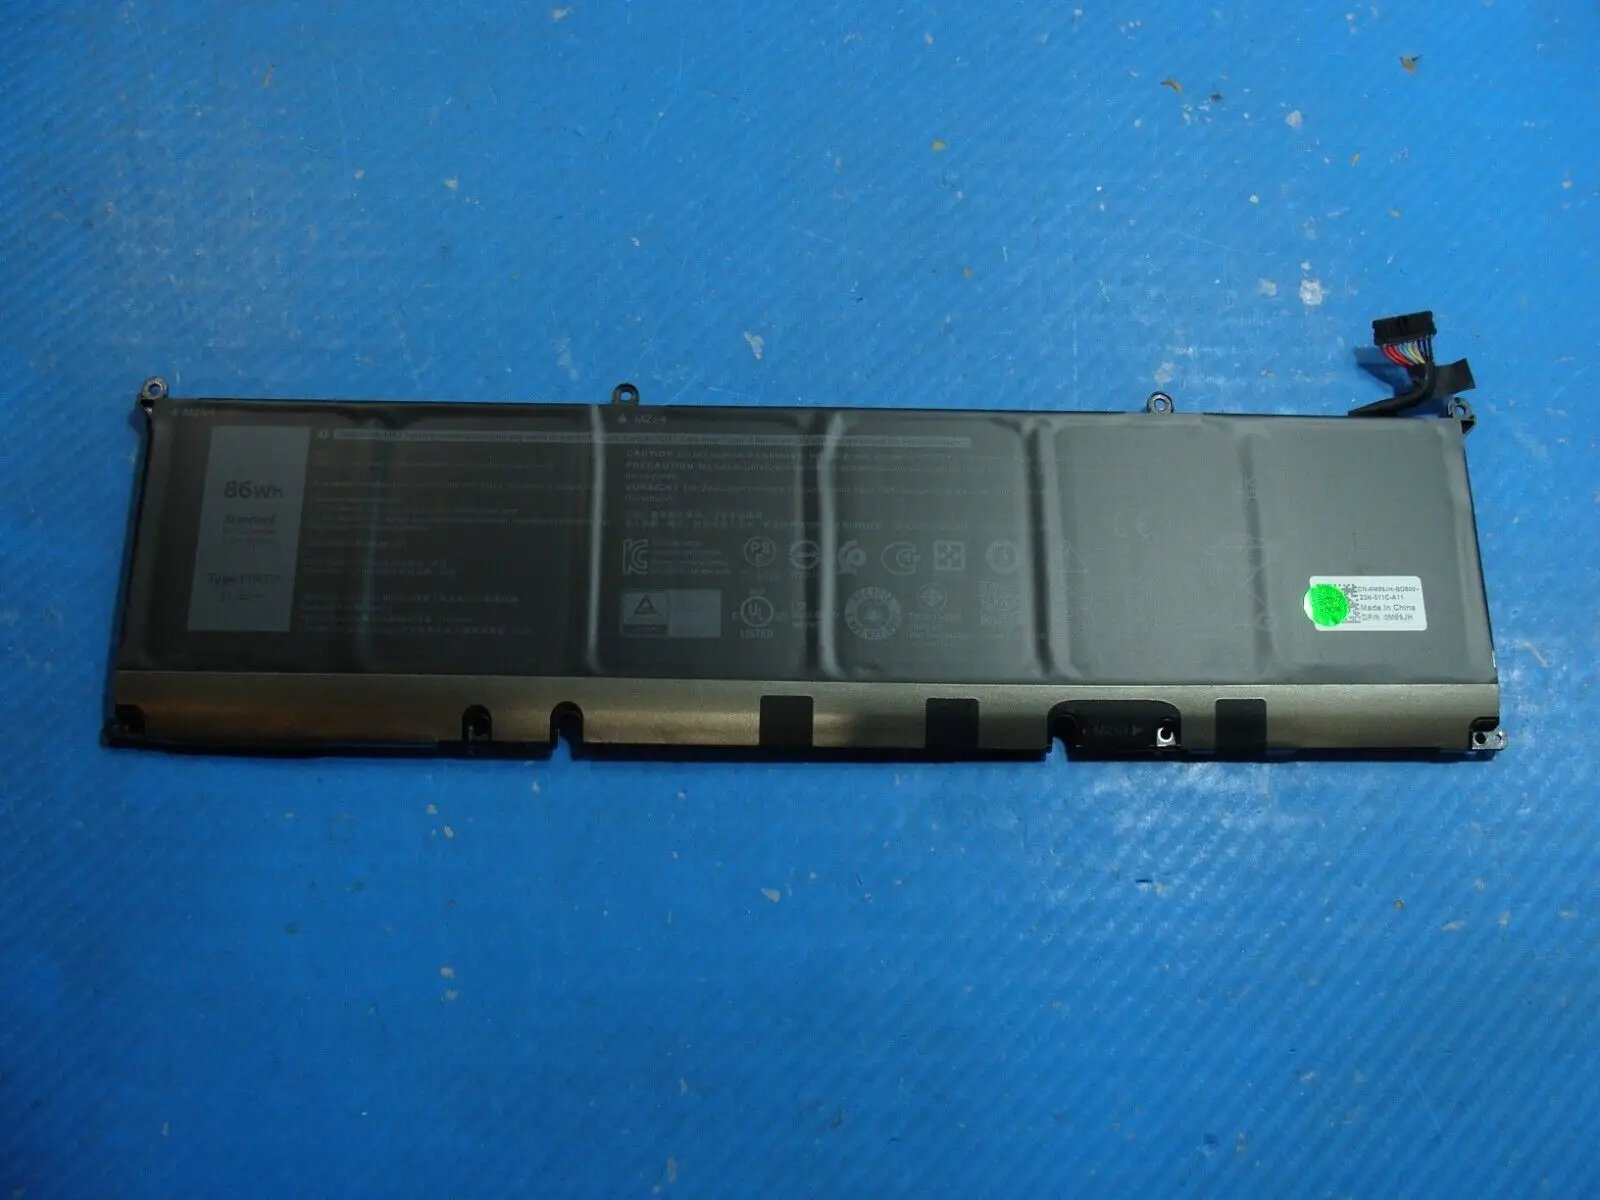 Dell Precision 15.6” 5570 OEM Battery 11.4V 86Wh 7167mAh 69KF2 M59JH Excellent